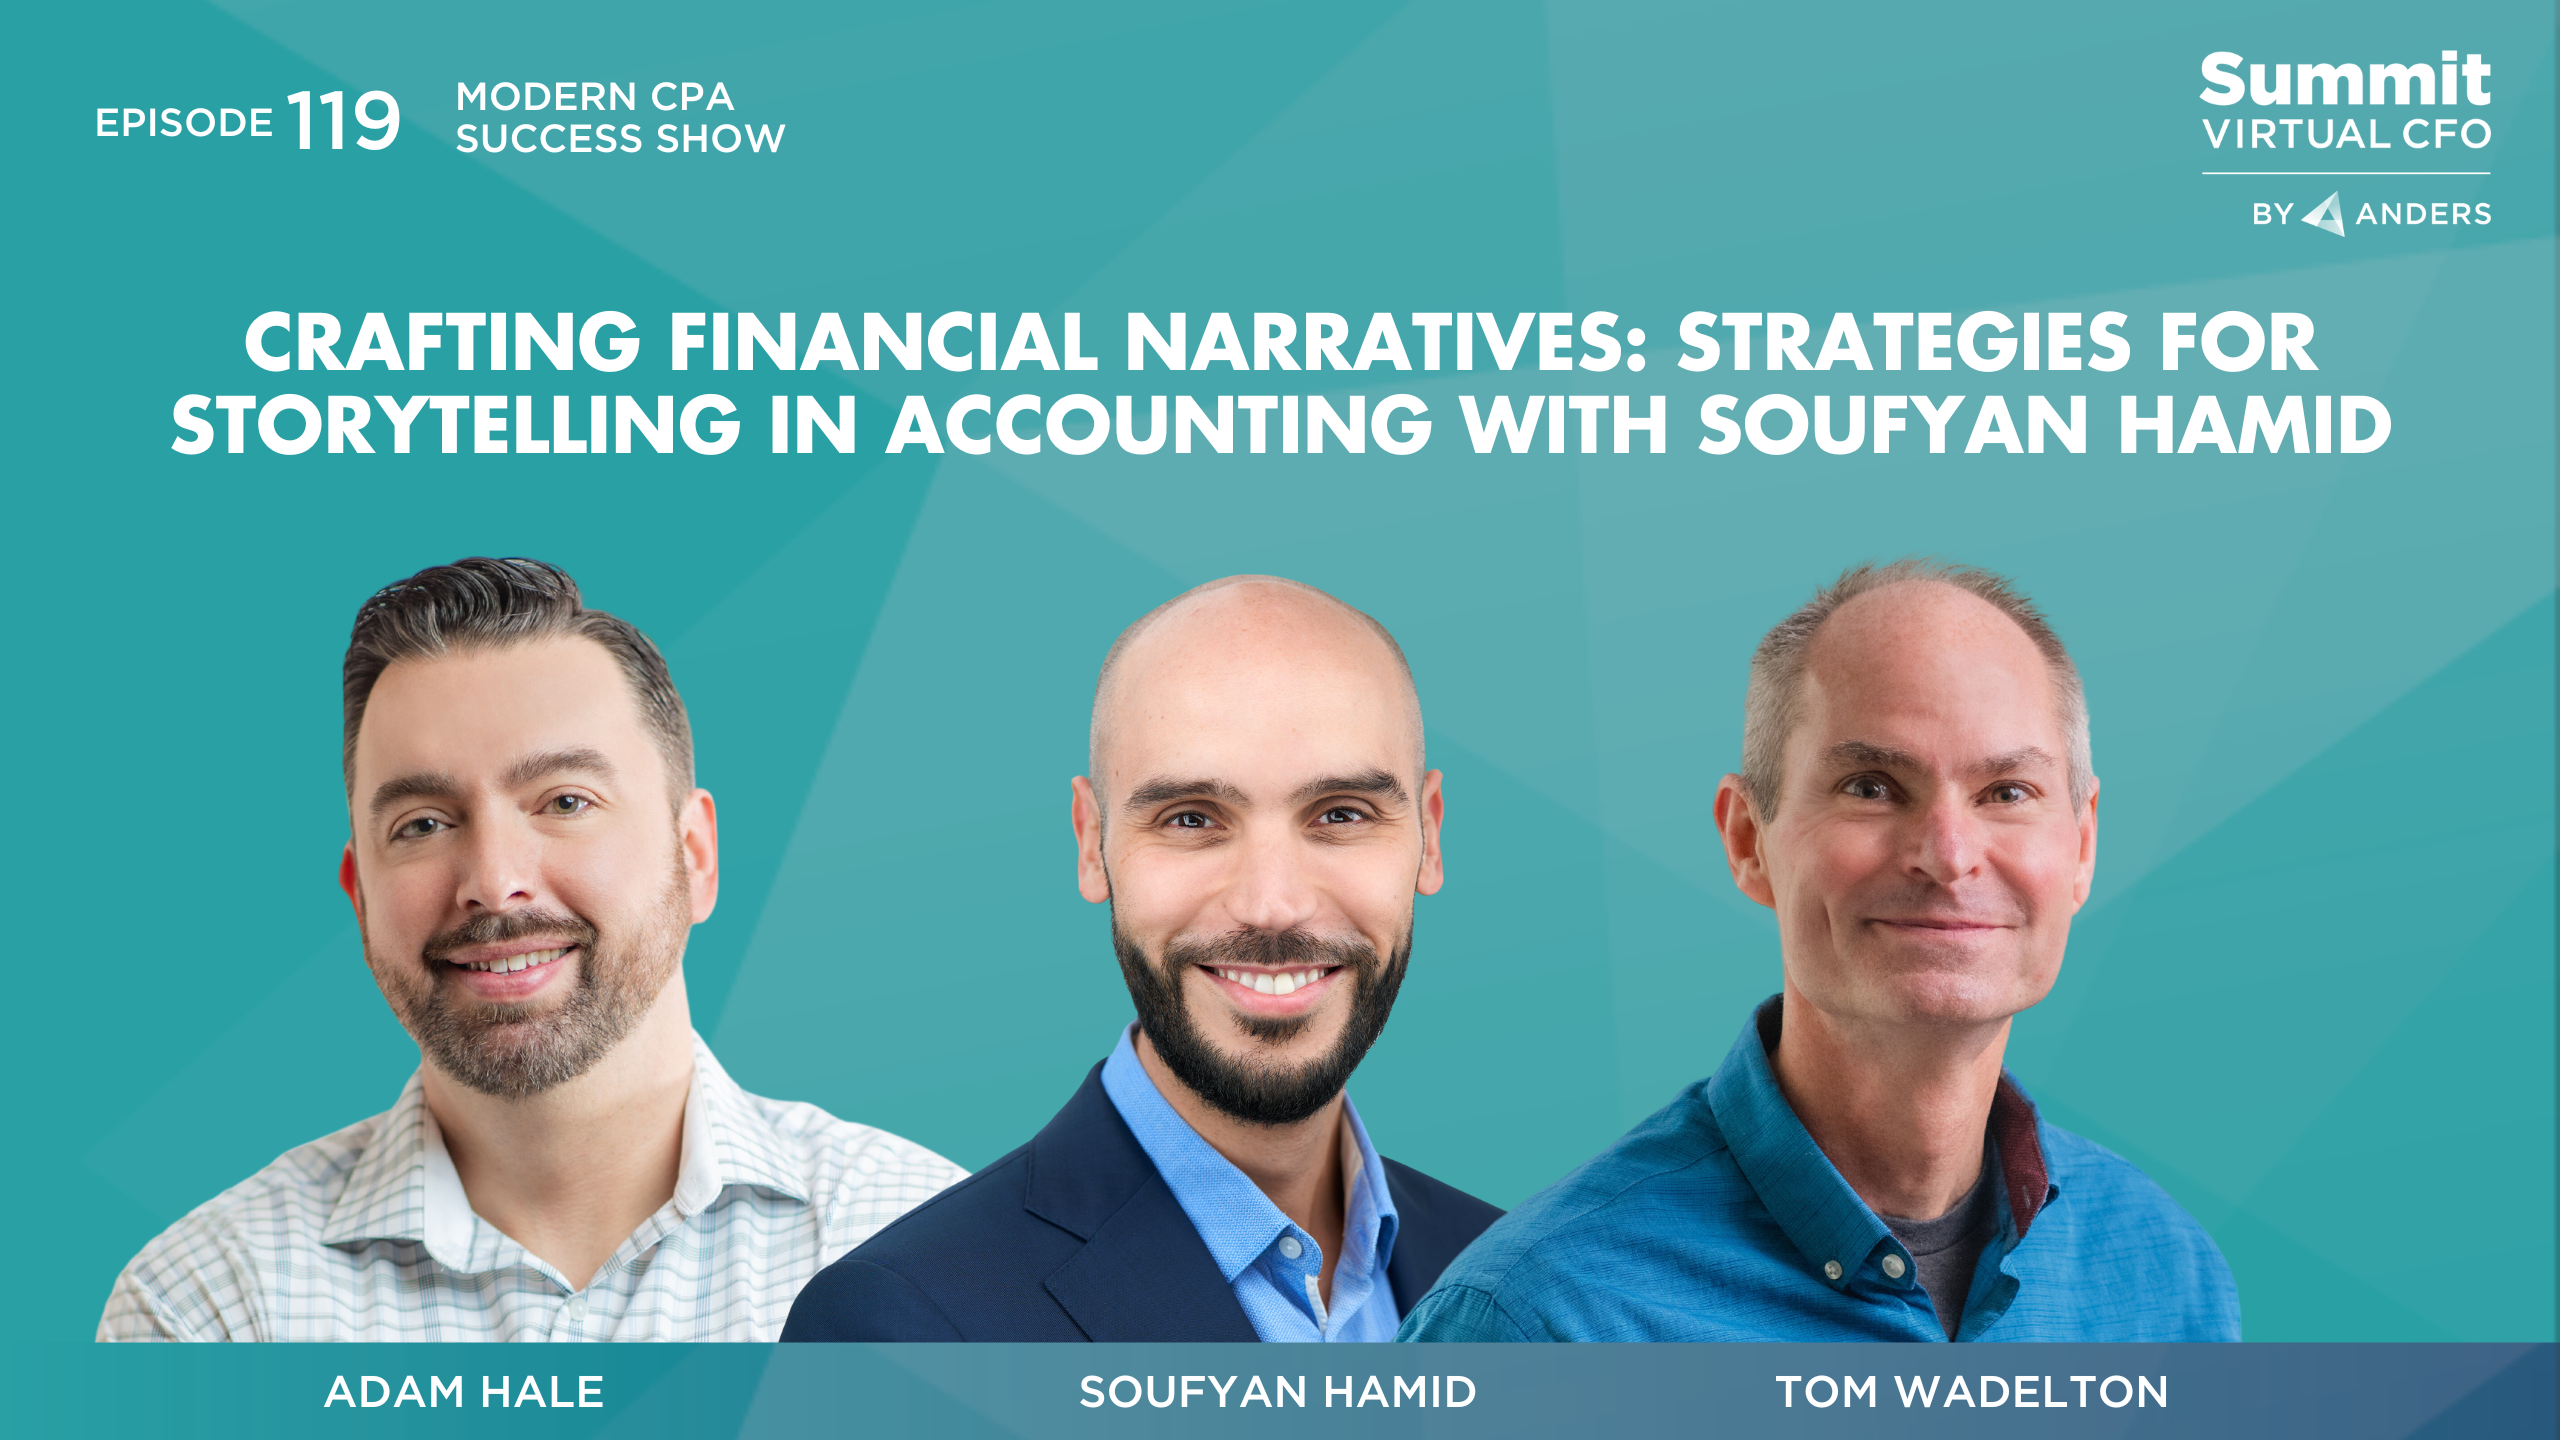 Strategies for Storytelling in Accounting with Soufyan Hamid